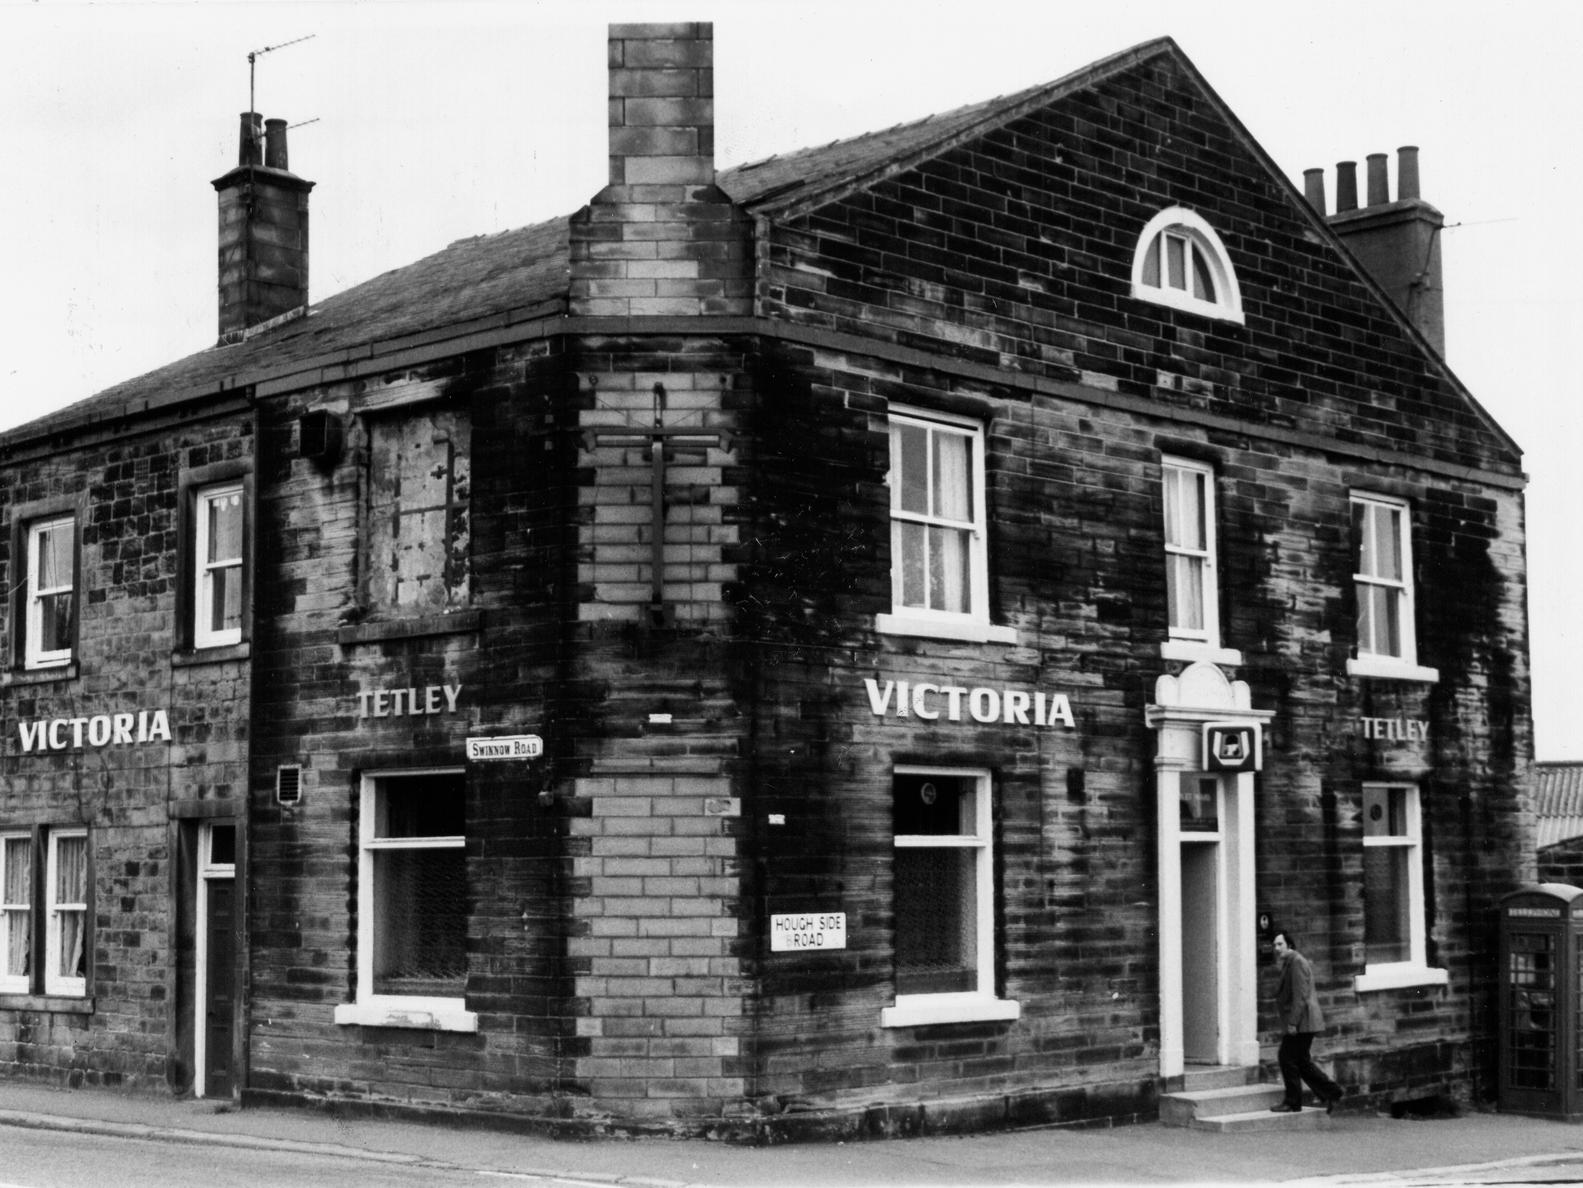 Were you a regular at the Victoria pub back in the day?